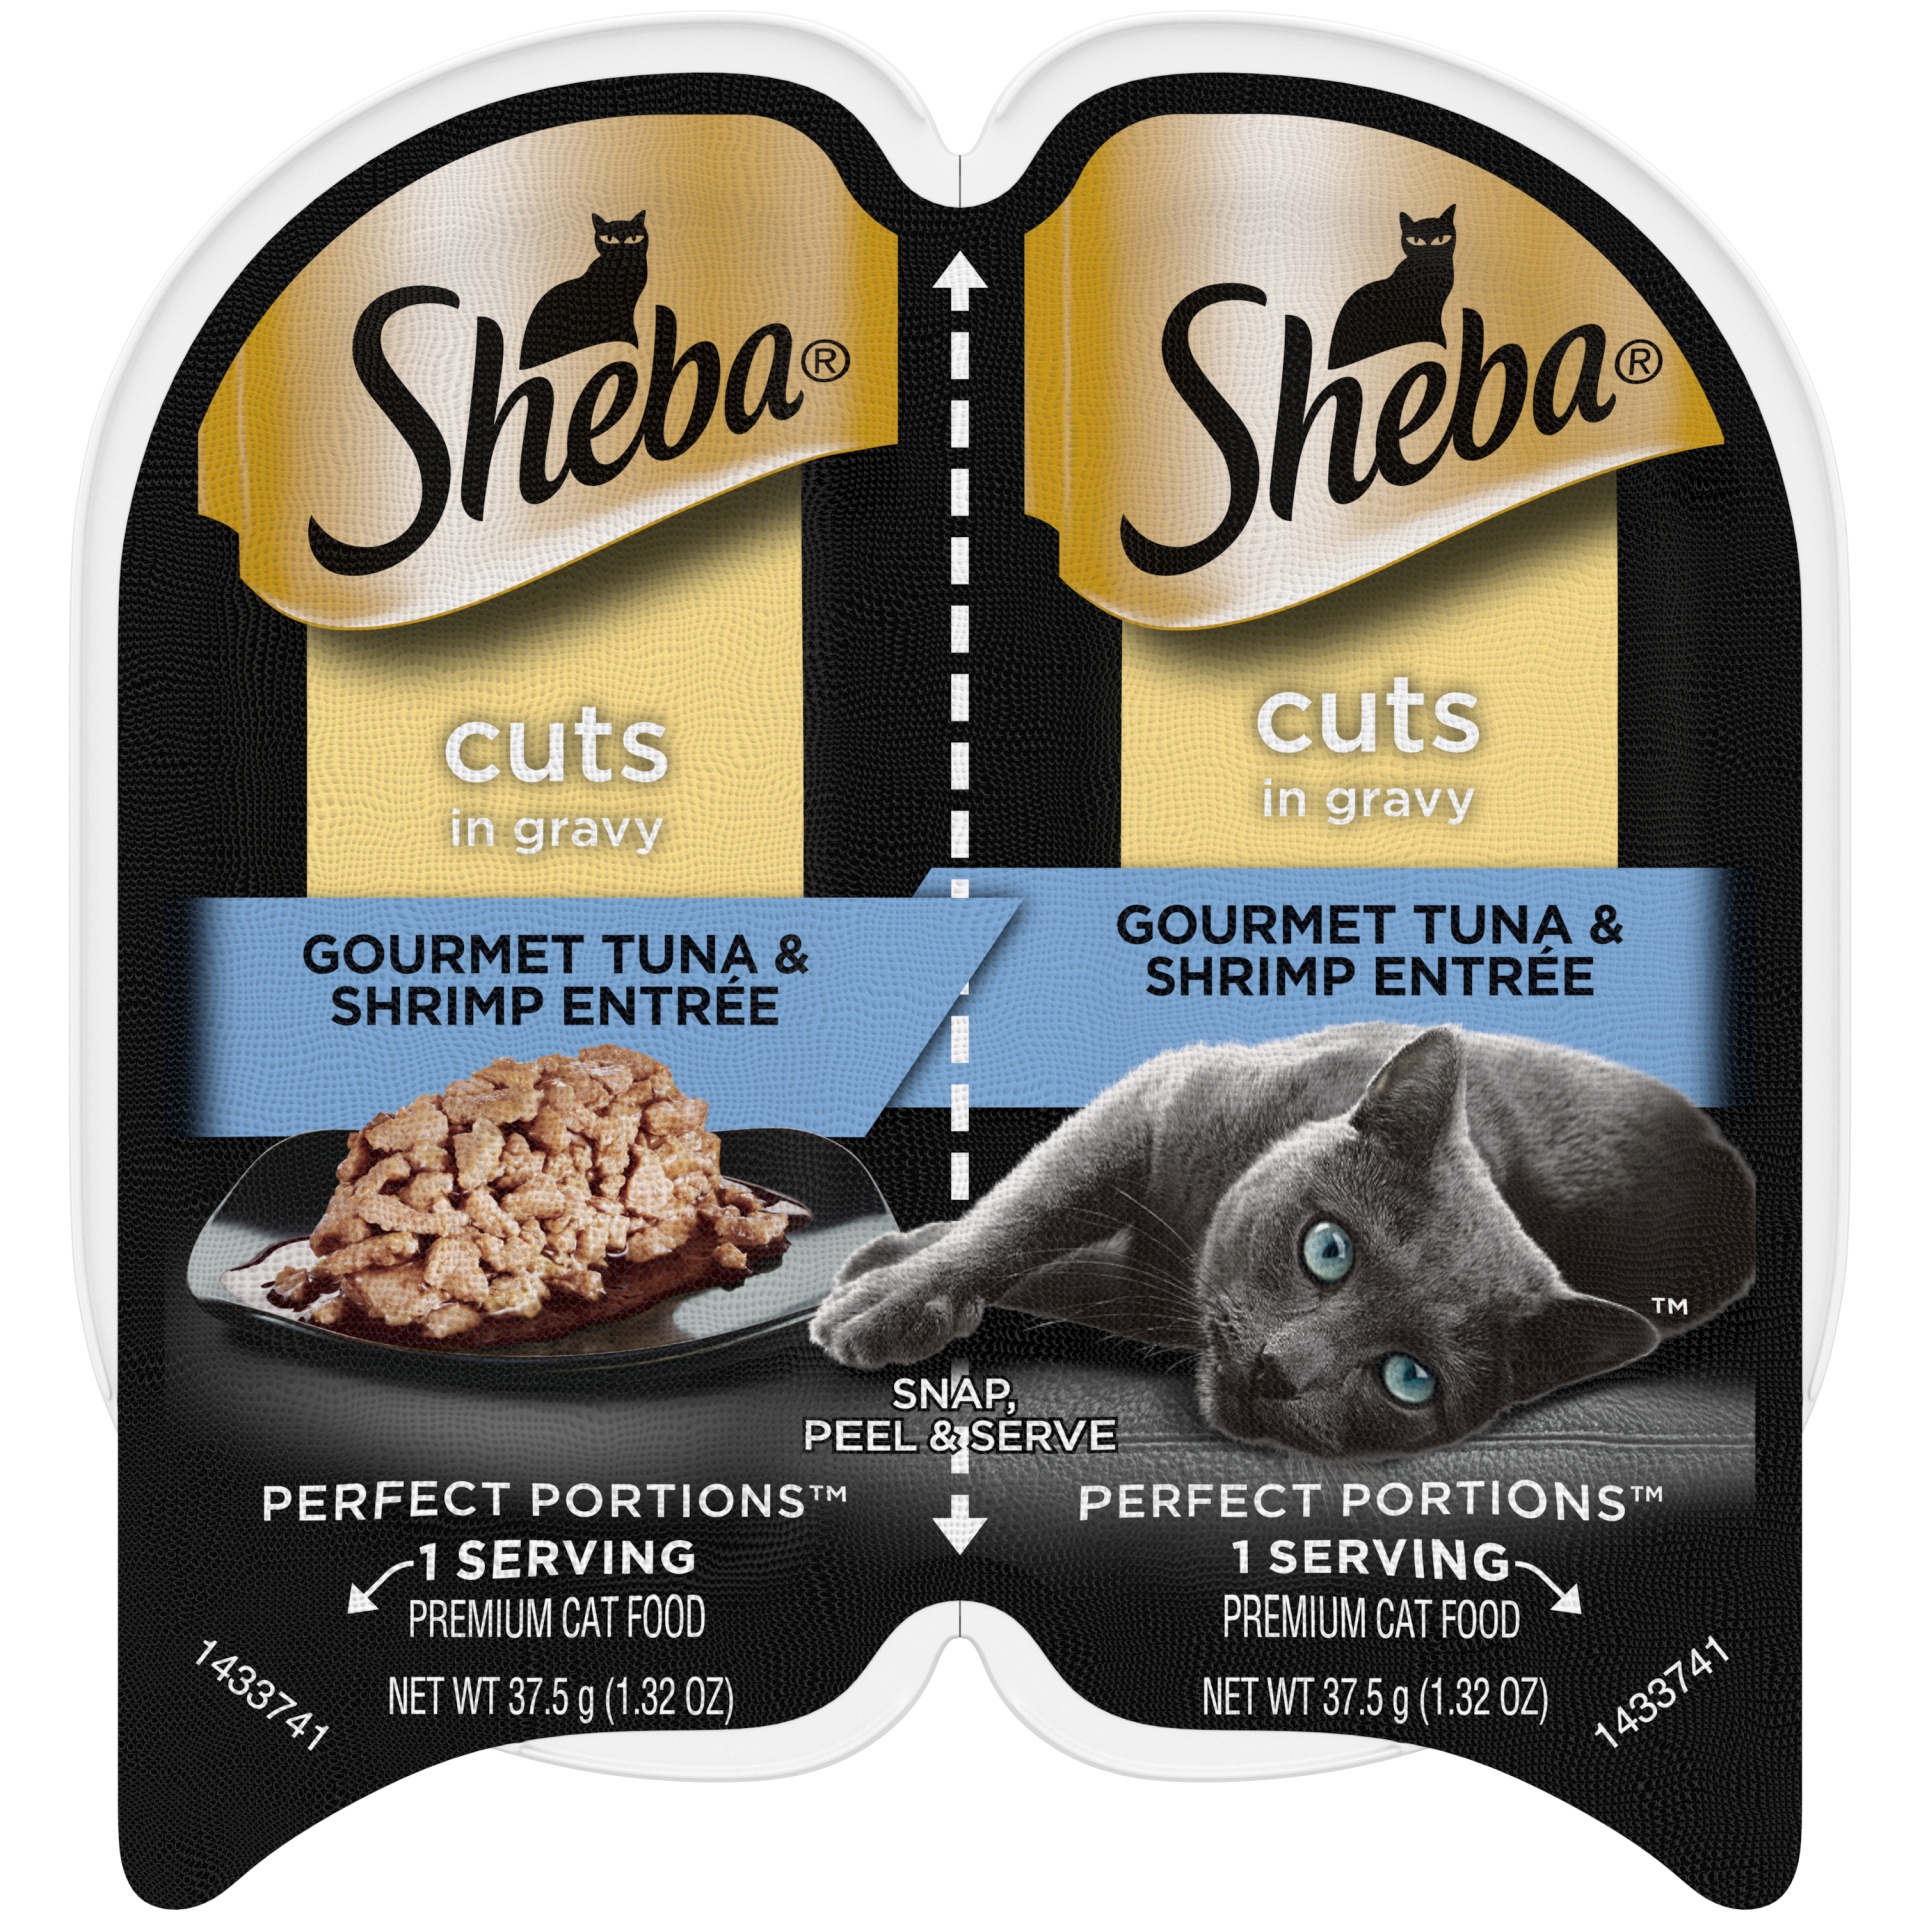 slide 1 of 1, SHEBA Wet Cat Food Cuts in Gravy Gourmet Tuna & Shrimp Entree, (24) PERFECT PORTIONS Twin-Pack Trays, 2.64 oz